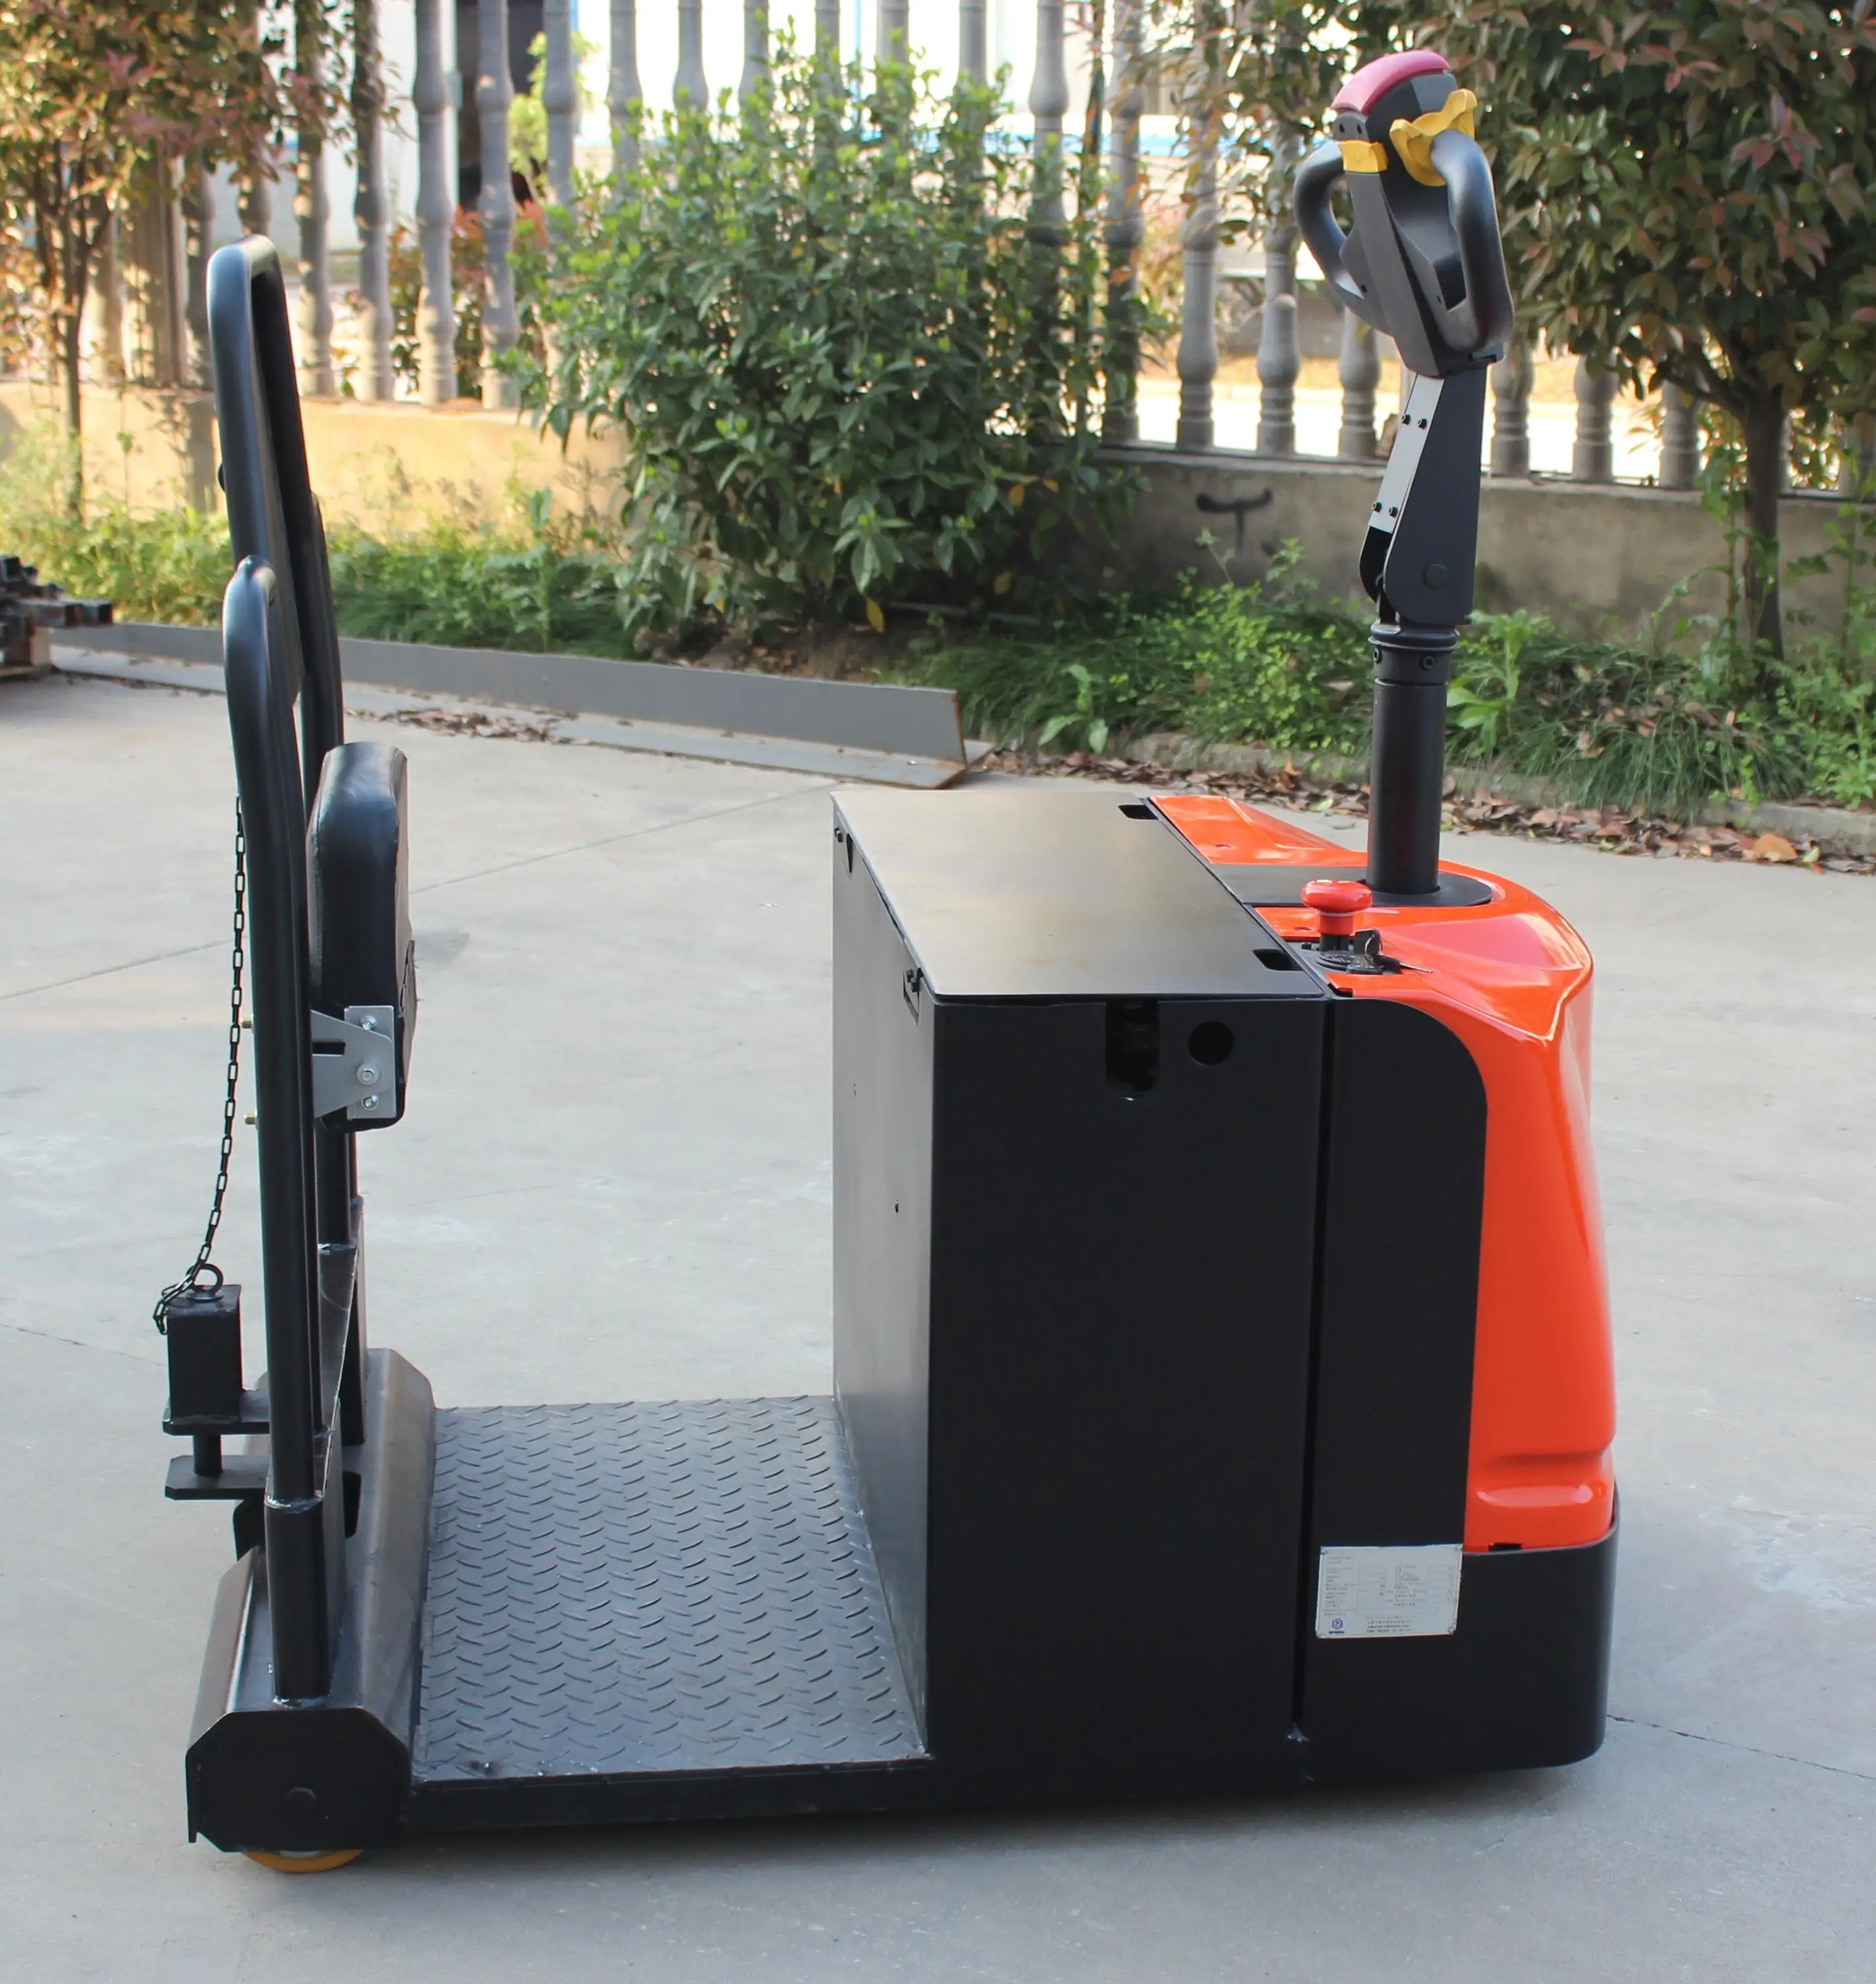 3.0 ton Electric Tugger Tow Tractor 6500 lbs Capacity UK